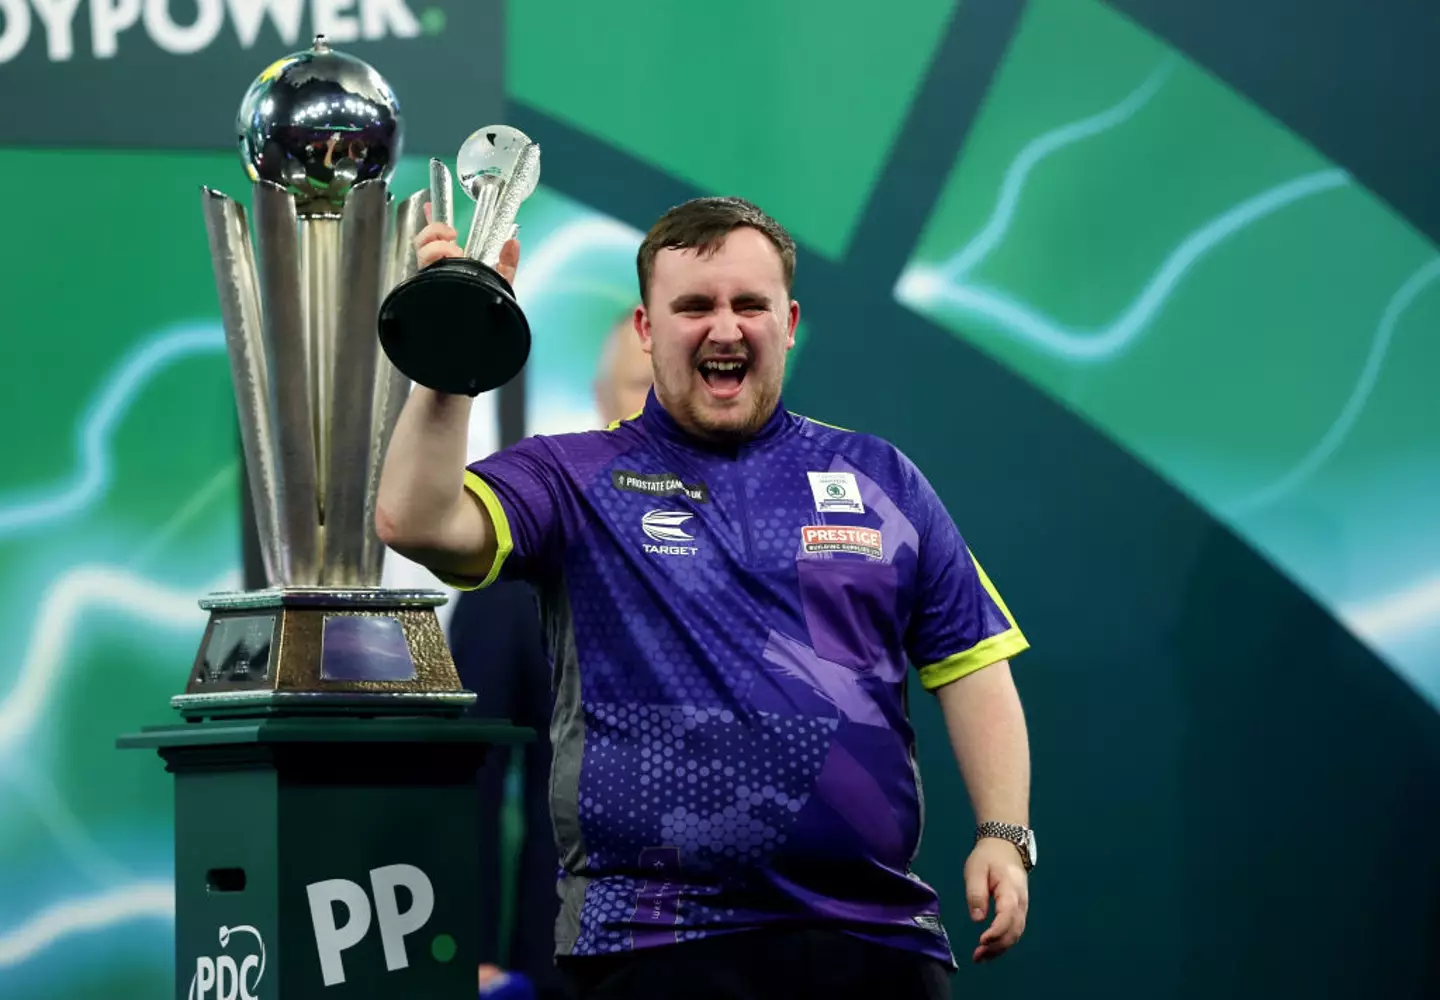 16-year-old prodigy Luke Littler has proved that age is just a number after lighting up the world of darts with his record-breaking world championship run.